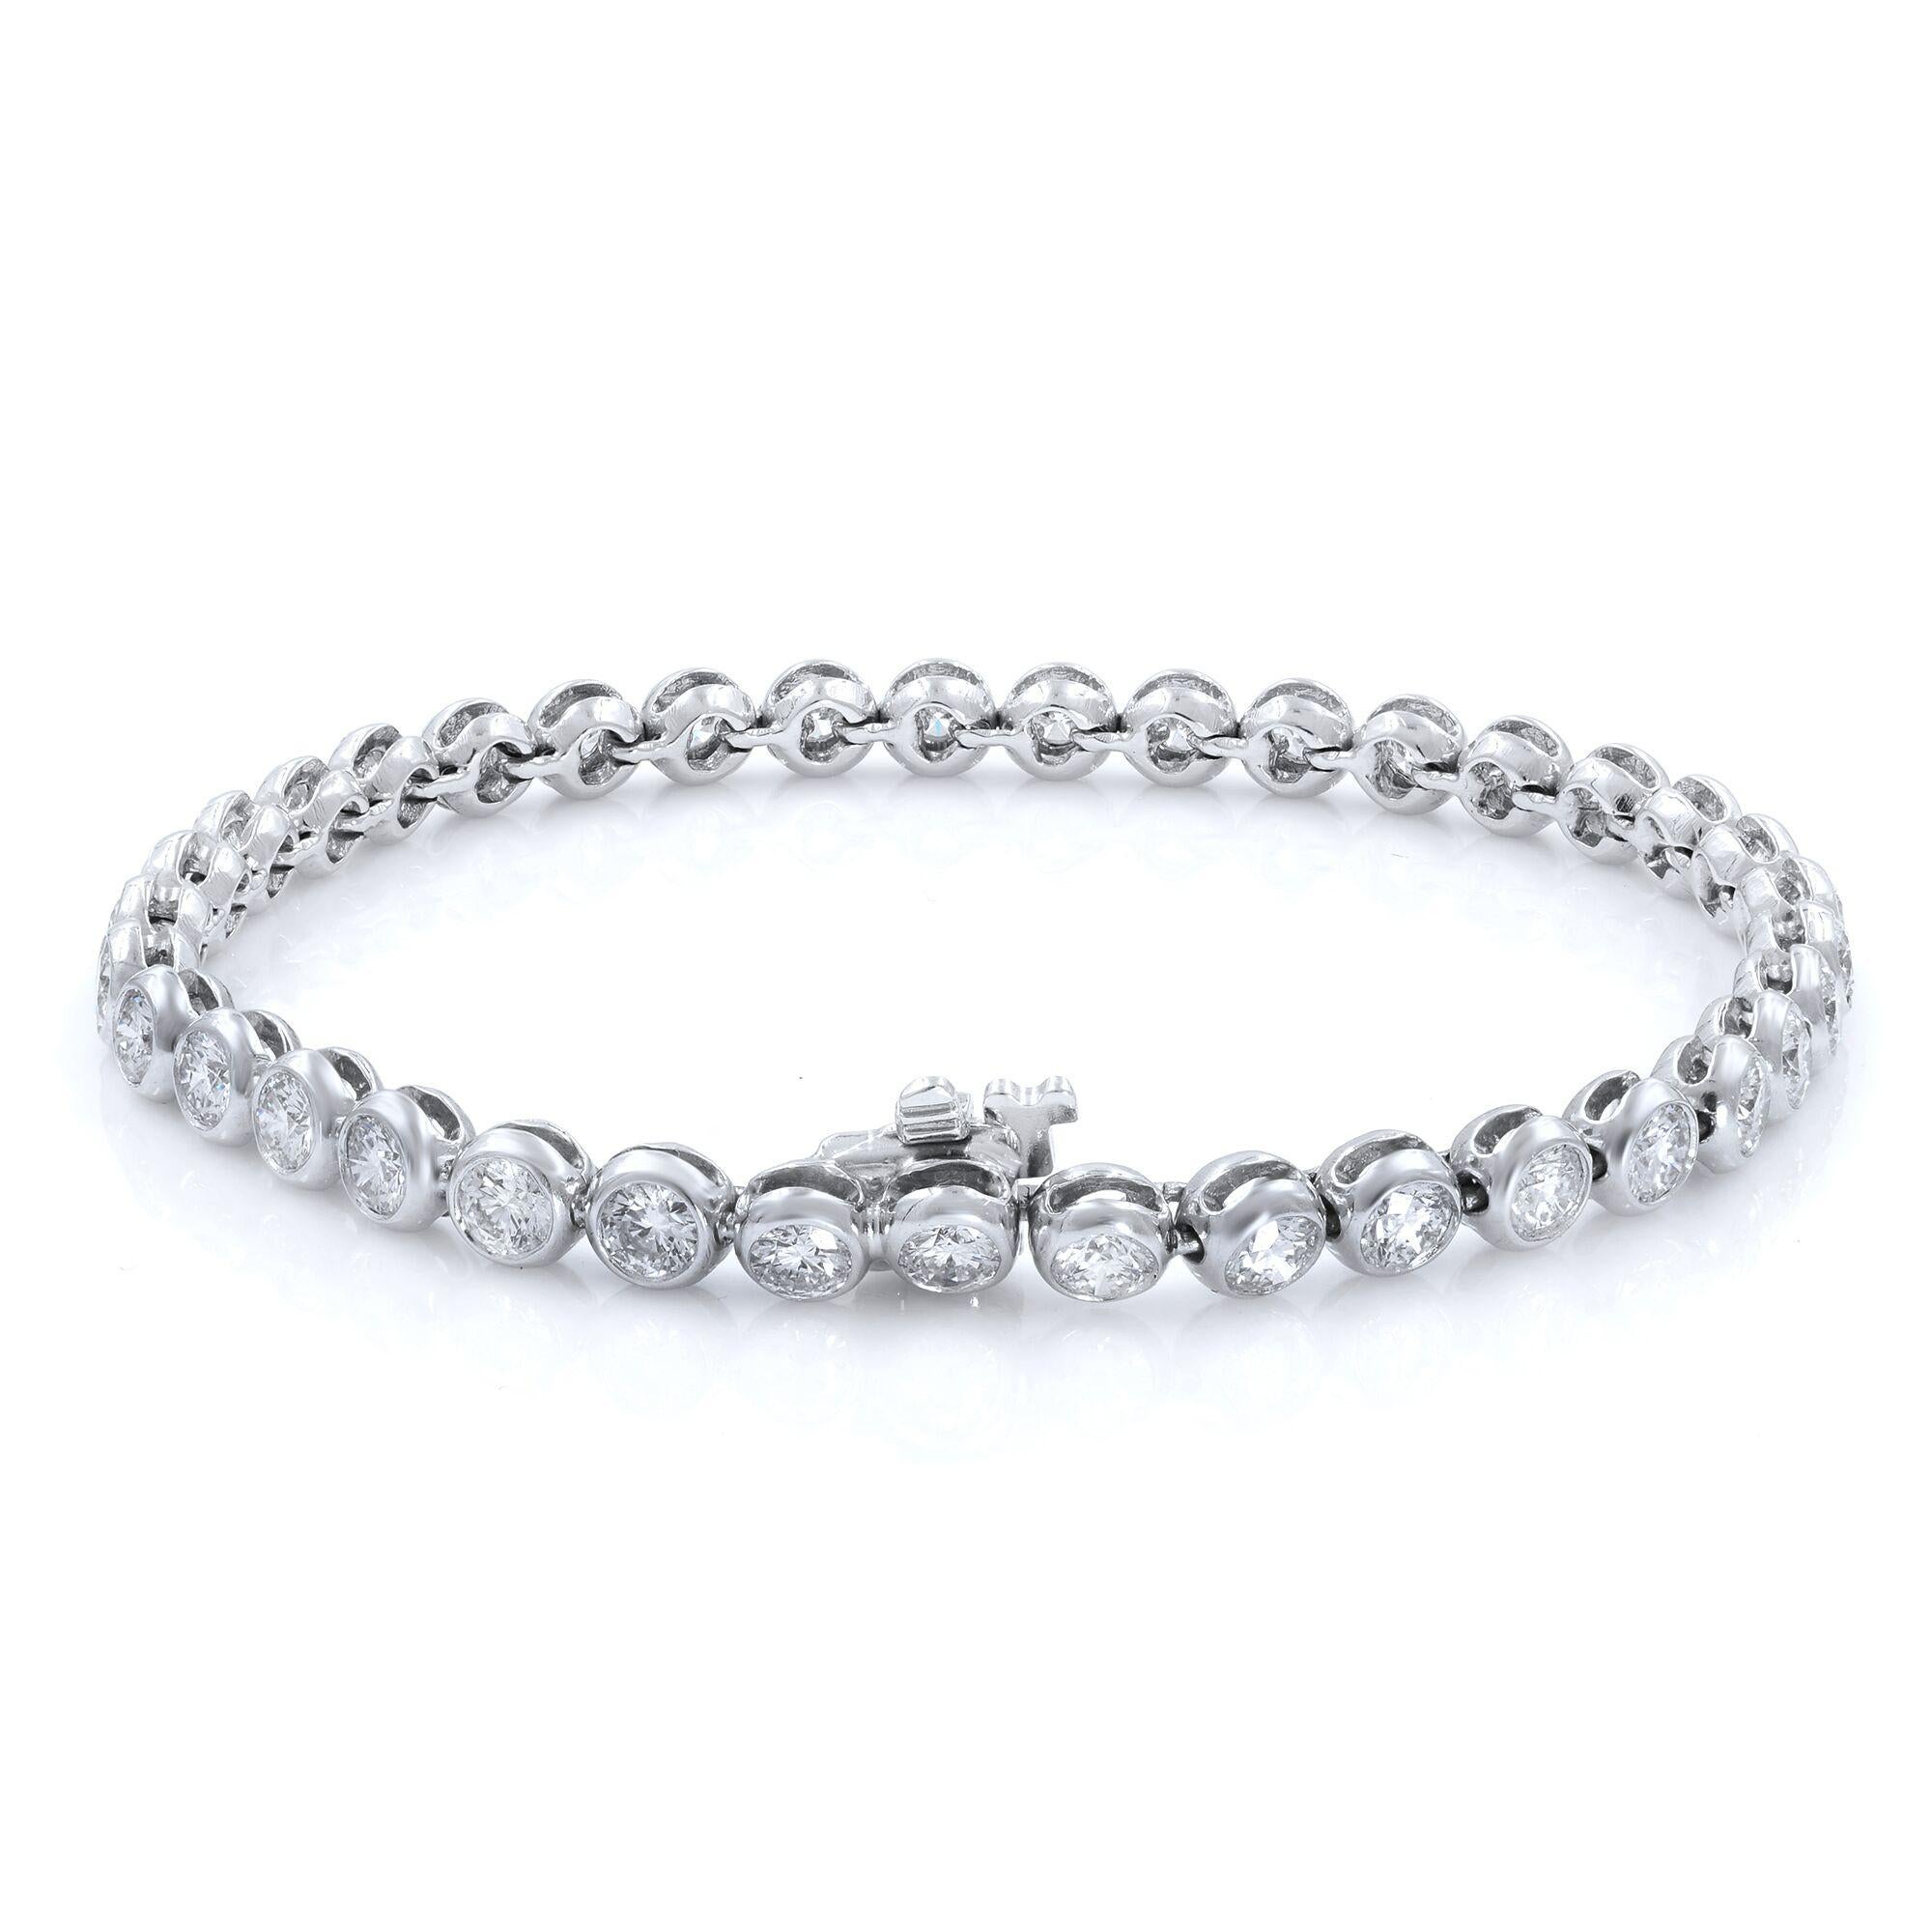 An elegant 14k white gold tennis bracelet featuring 37 round diamonds in a bezel setting. Total diamond weight is 5.50 carats where each diamond is 3.0mm. Diamond possesses color and clarity of H-I and VS-SI. All diamonds are perfectly matched to